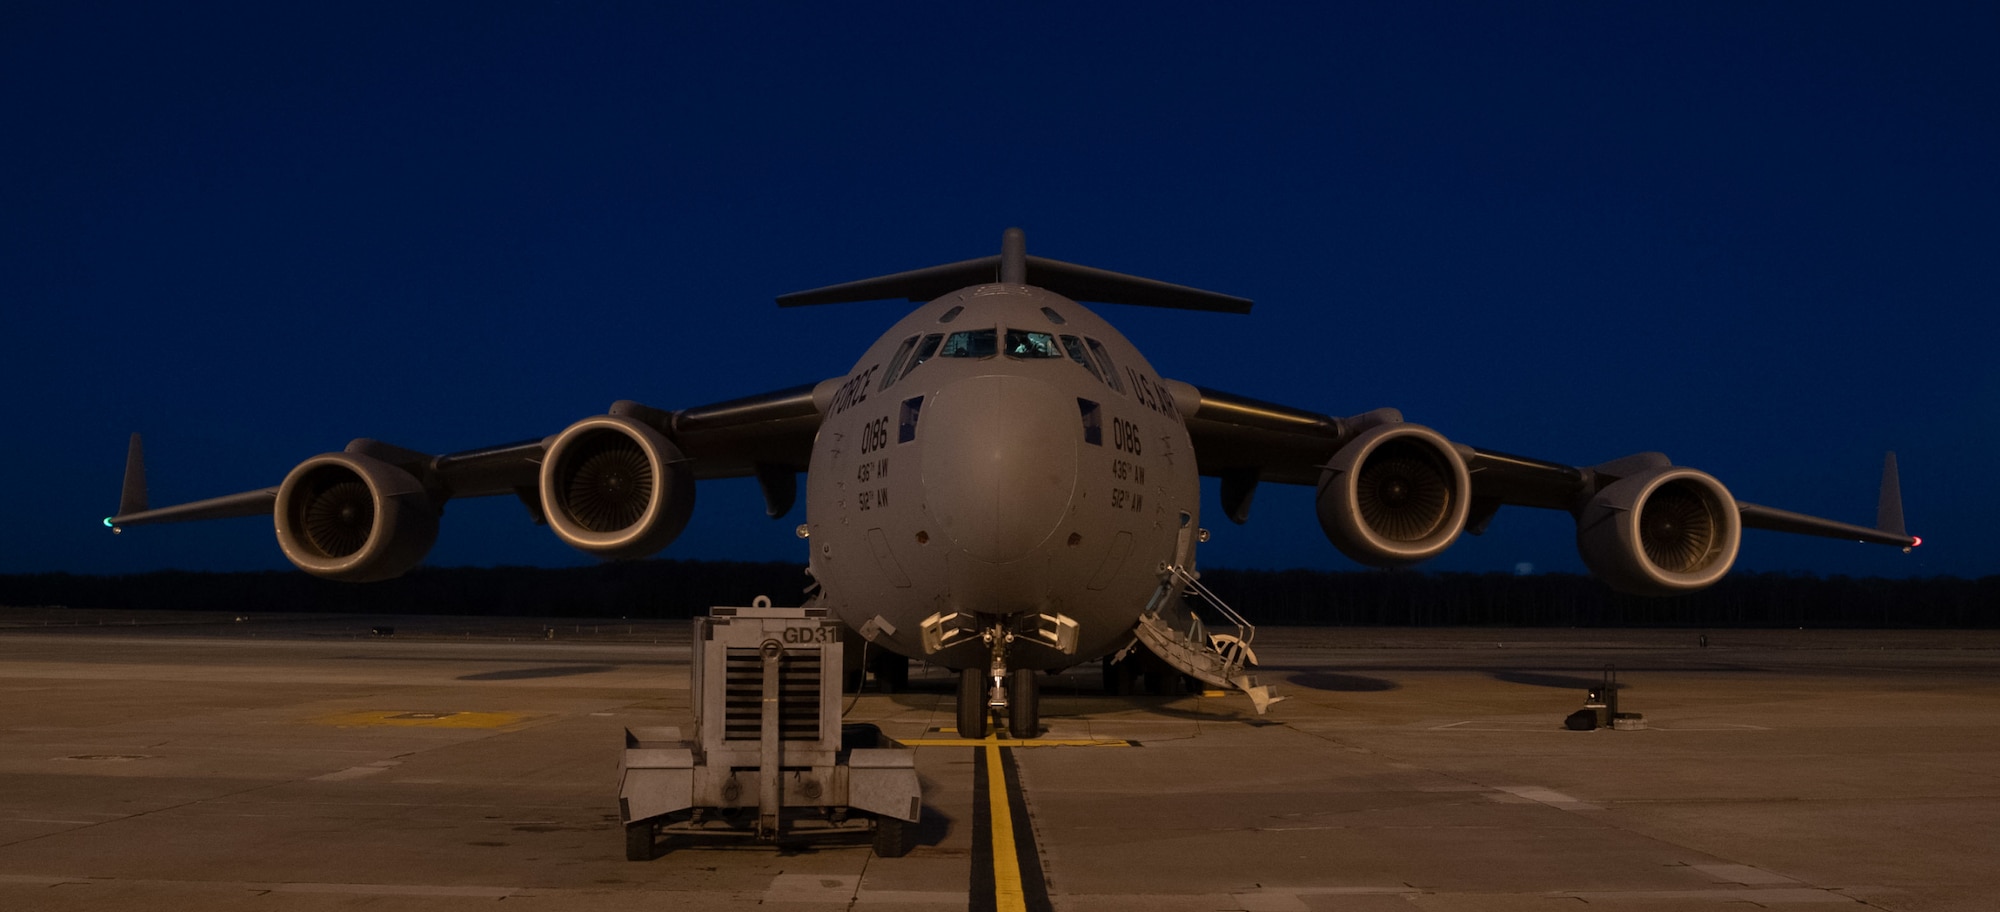 A C-17 Globemaster III is prepared for a night training mission at Dover Air Force Base, Delaware, Jan. 28, 2021. Dover AFB supports 20% of the nation’s strategic airlift and routinely flies local training missions to sustain mission readiness for global operations. Night training missions serve to ensure aircrew effectiveness and readiness in contested and challenging environments. (U.S. Air Force photo by Airman 1st Class Faith Schaefer)